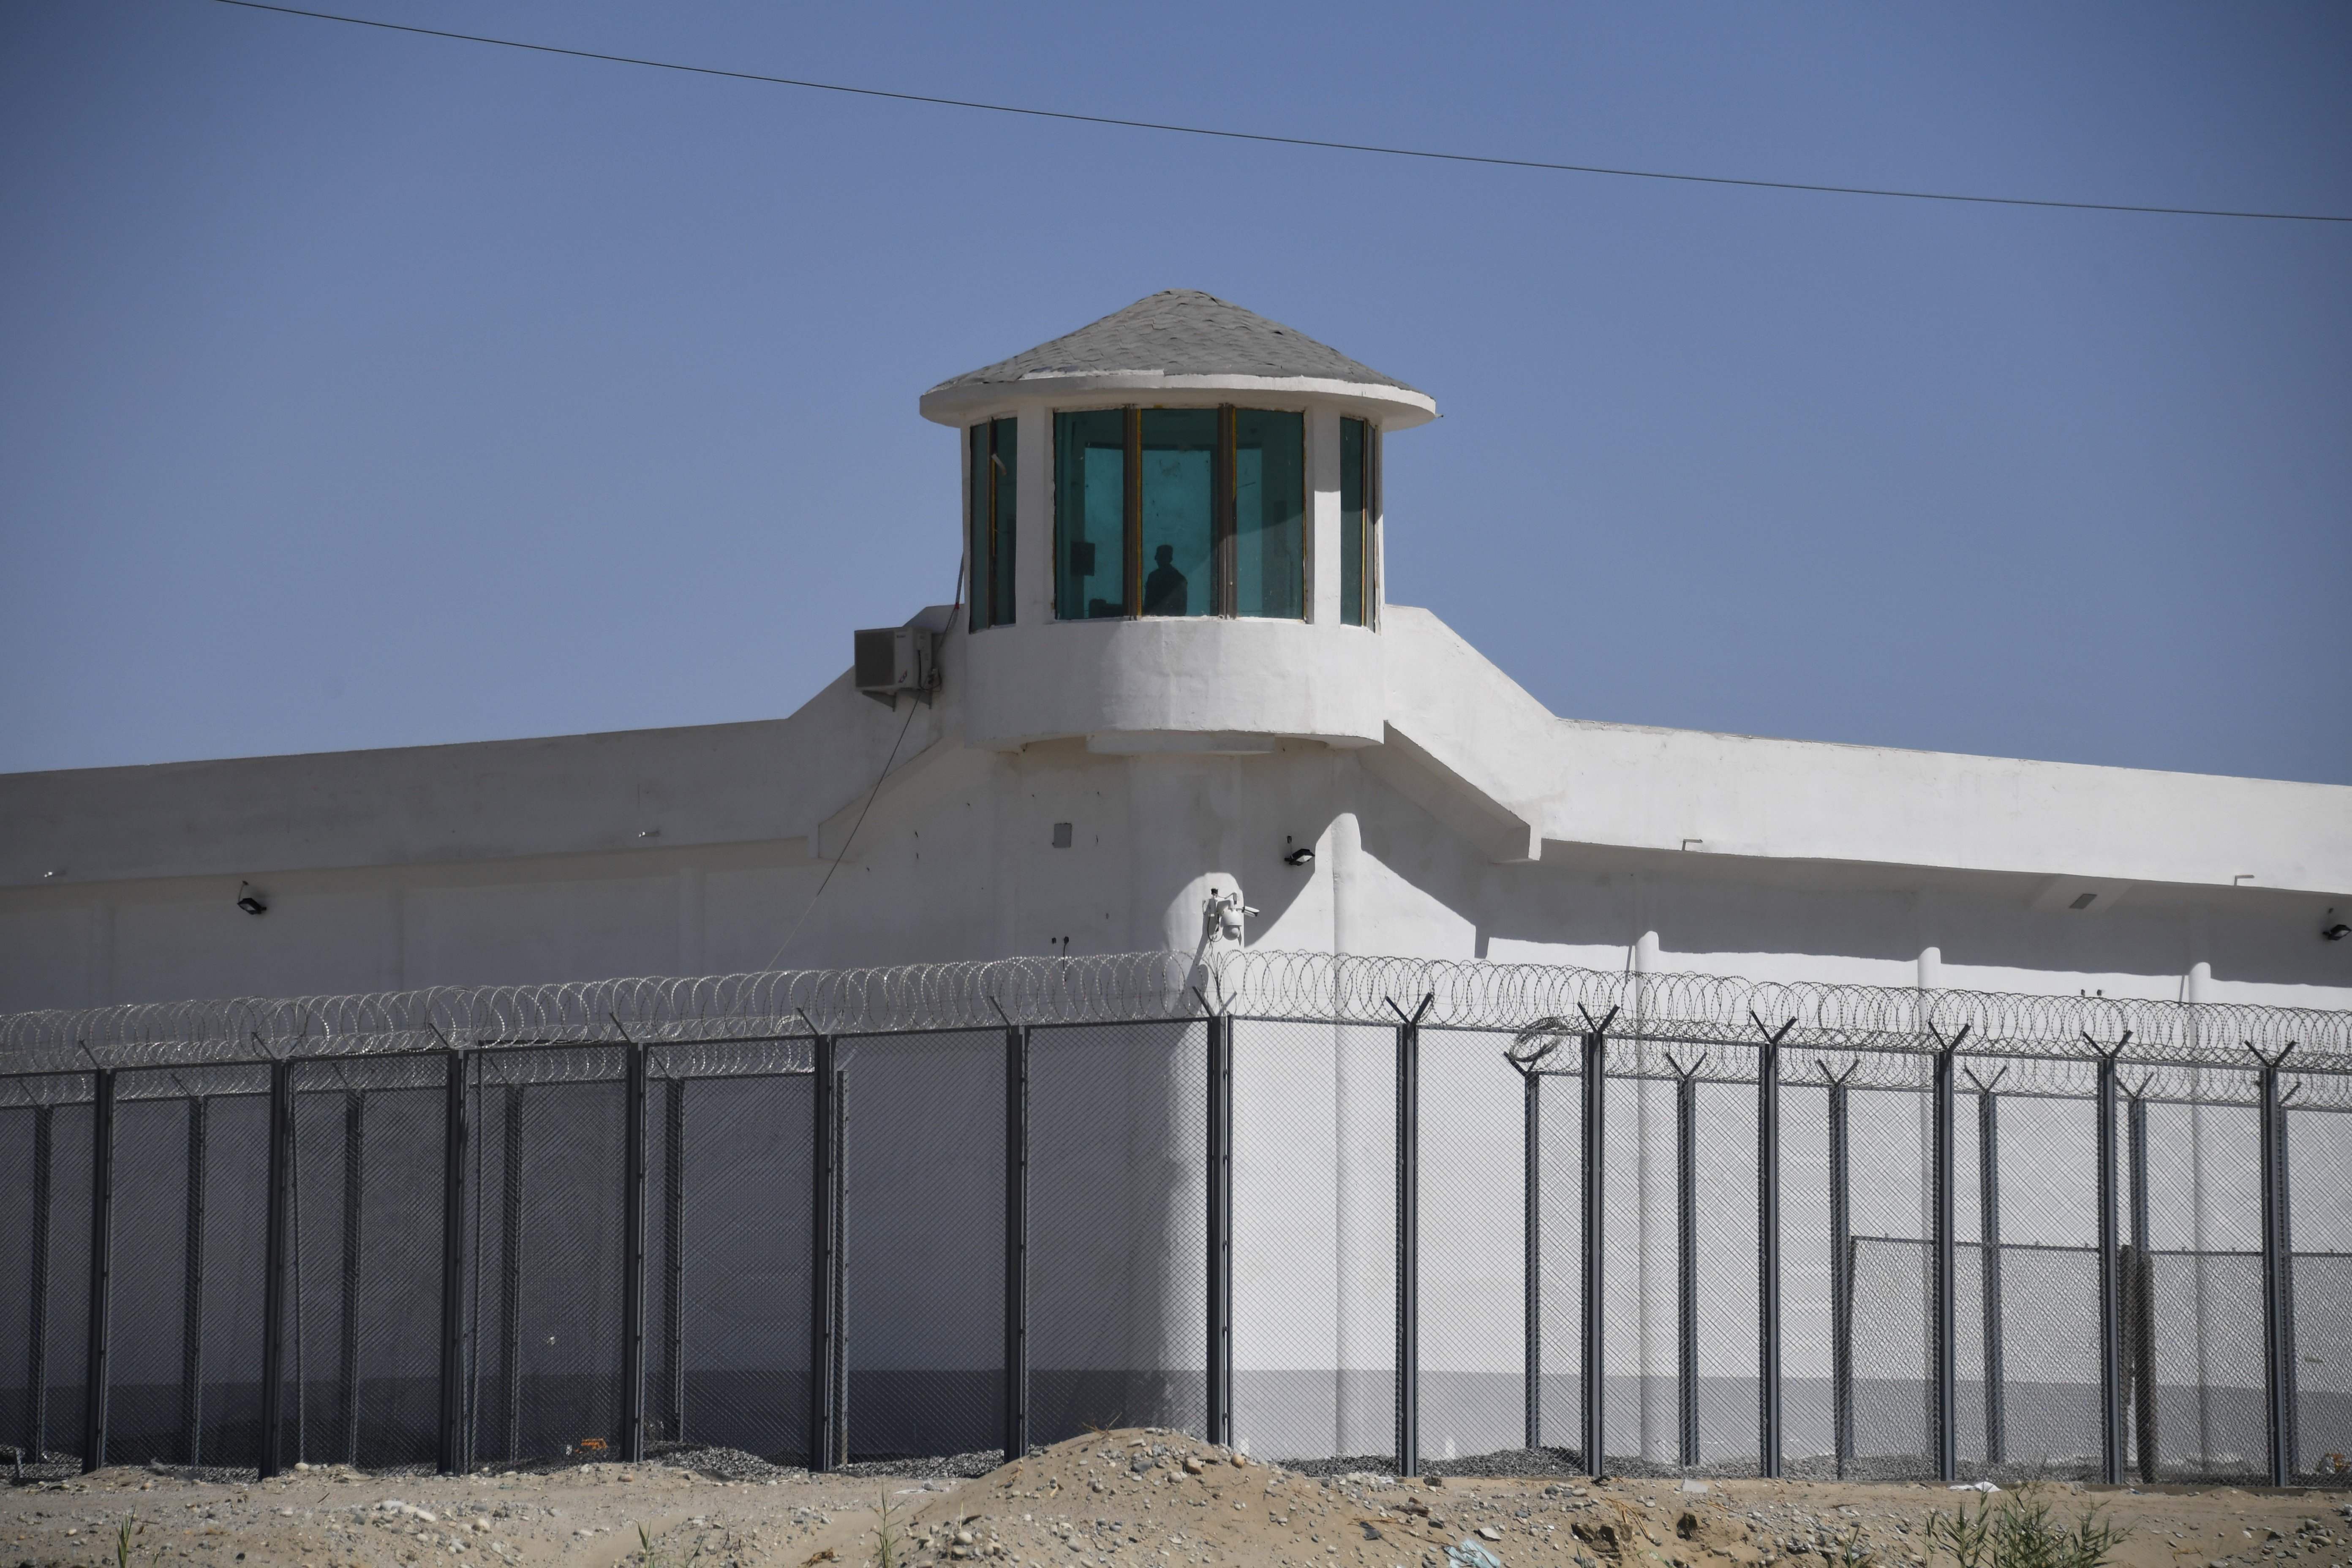 A watchtower on a high-security facility near what is believed to be a re-education camp where mostly Muslim ethnic minorities are detained, on the outskirts of Hotan, in China’s northwestern Xinjiang region